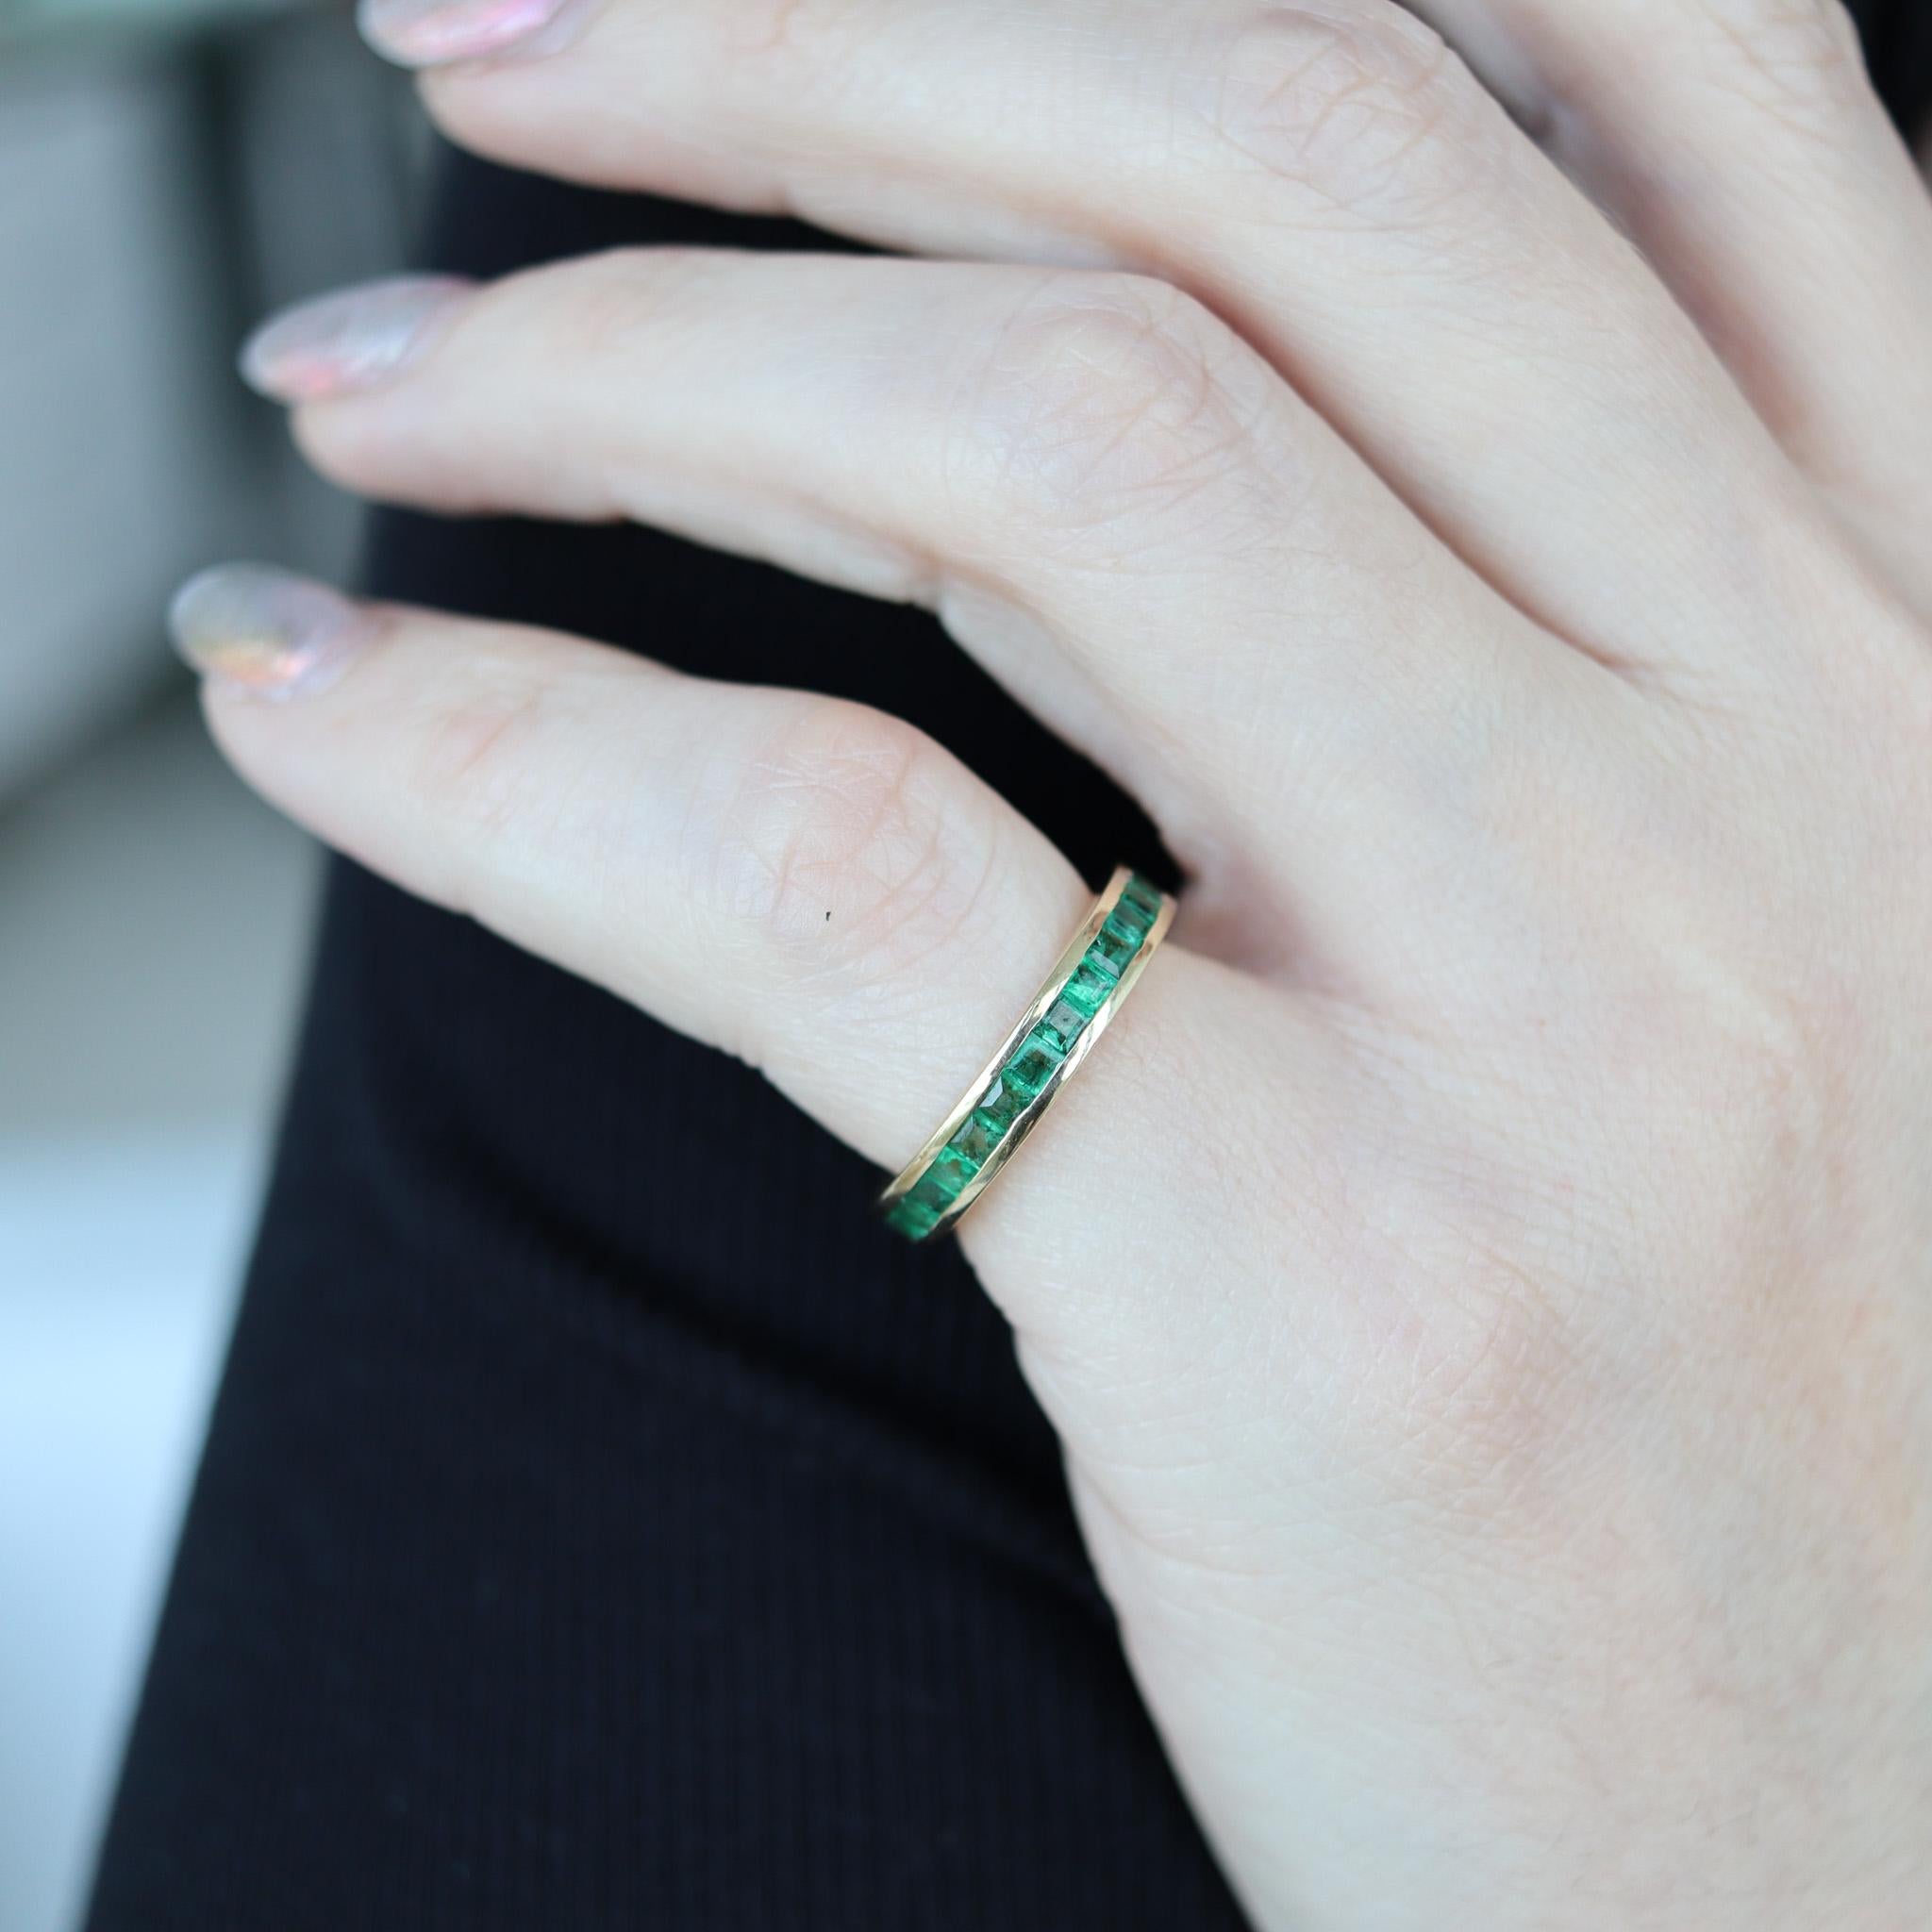 Eternity band with emeralds.

Beautiful eternity band ring, crafted in Vicenza Italy in solid yellow gold of 14 karats with high polished finish. Mounted with a great selection of twenty-nine natural green emeralds.

Emeralds: Mounted in a channel